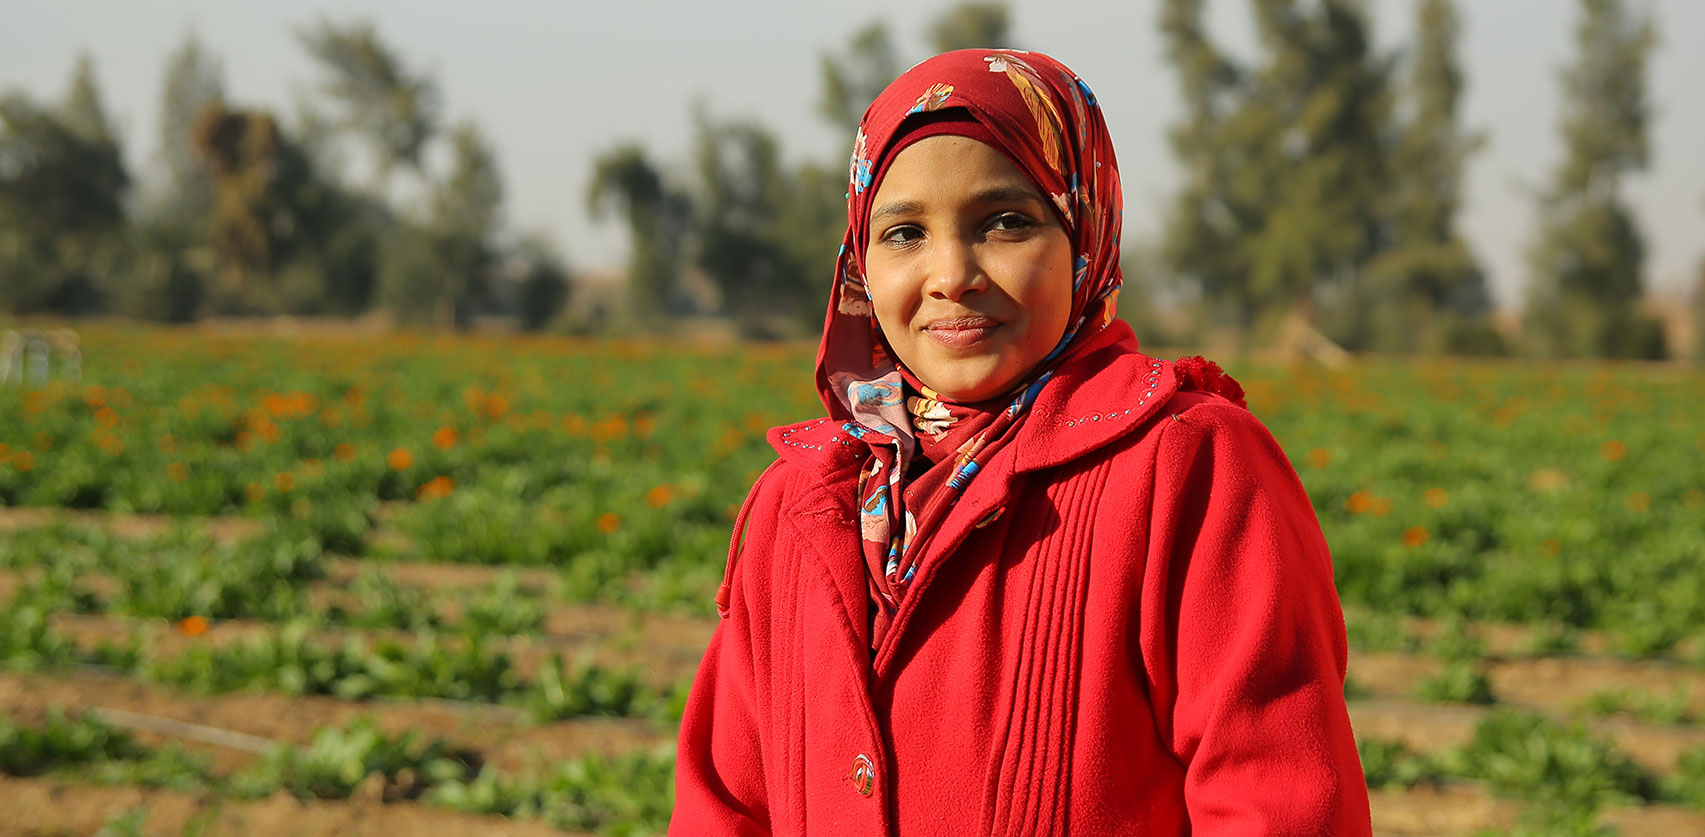 Female Farmer in Red in chamomile field in Egypt /><span class=''>Individually we make a choice.<br />
Together we make a difference.</span>
<p>As we work to reduce our environmental footprint, increase equal opportunity and amplify voices, I know none of this would be possible without caring people committed to this work. To everyone intent on making these things a reality, I thank you, because we are all in this together and together, we can change the world for the better.</p>
<img src=